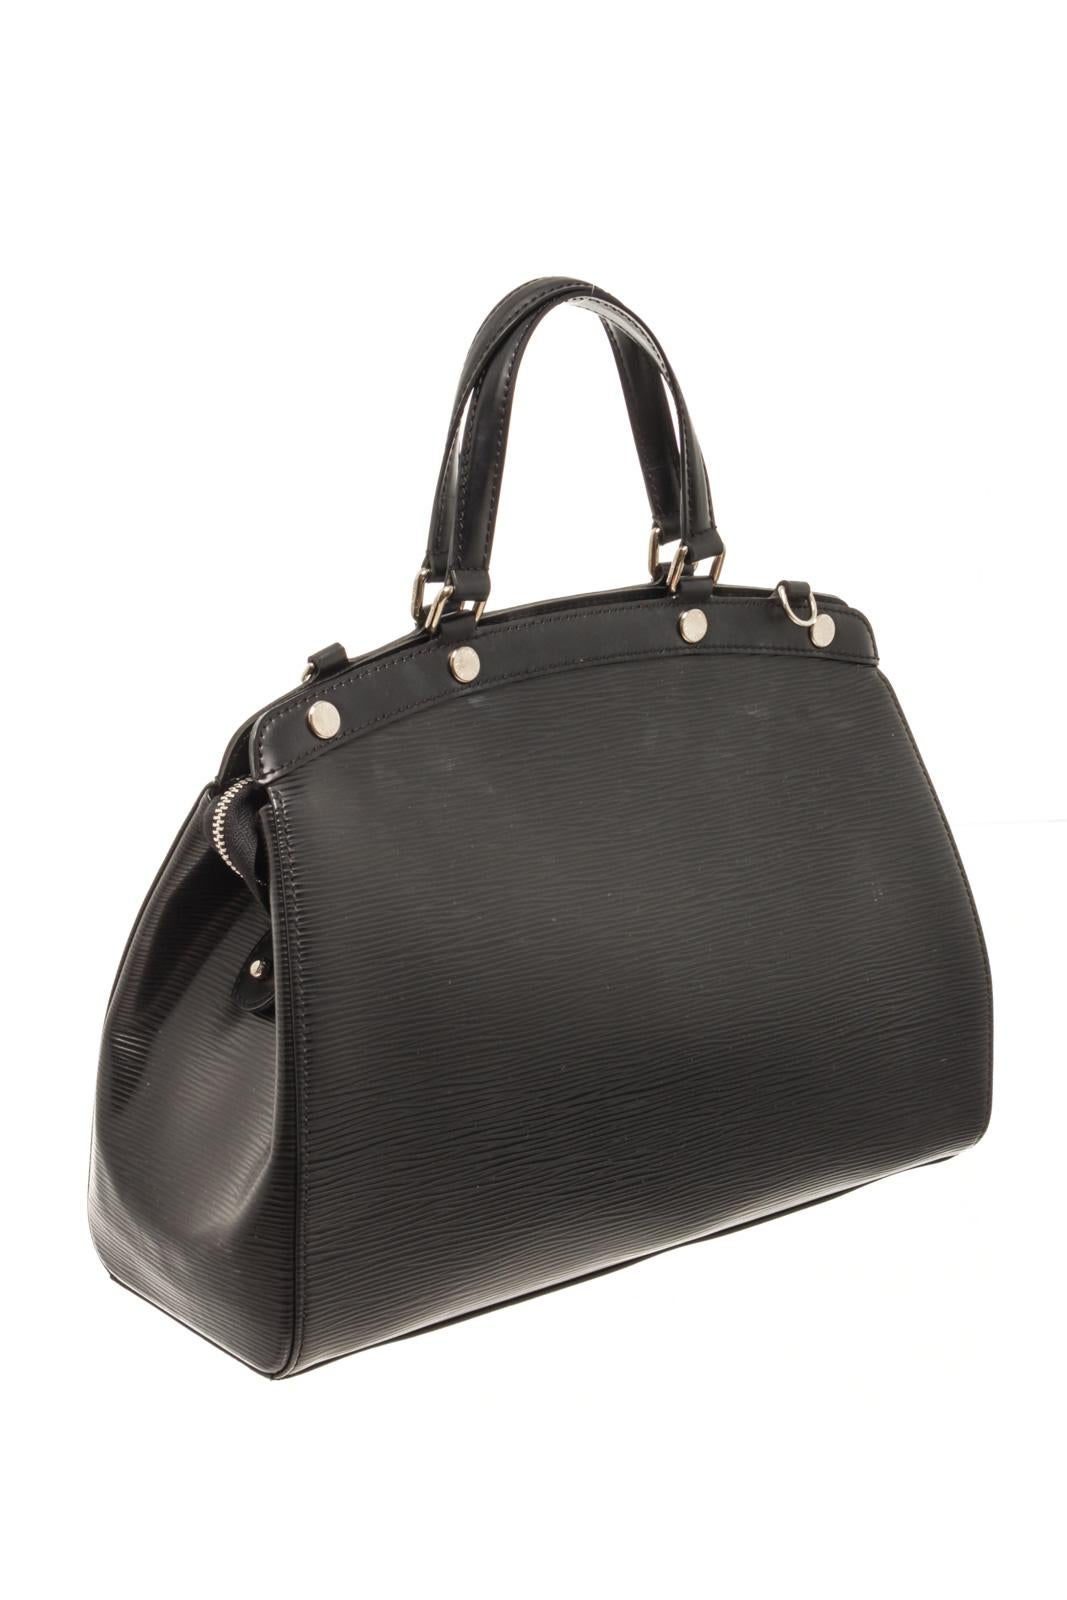 Louis Vuitton Black Epi Leather Brea MM Bag with the feminine shape of louis vuitton's brea is inspired by the doctor's bag. crafted from epi leather in black, the bag has a perfect finish. the fabric interior is spacious and it is secured by a